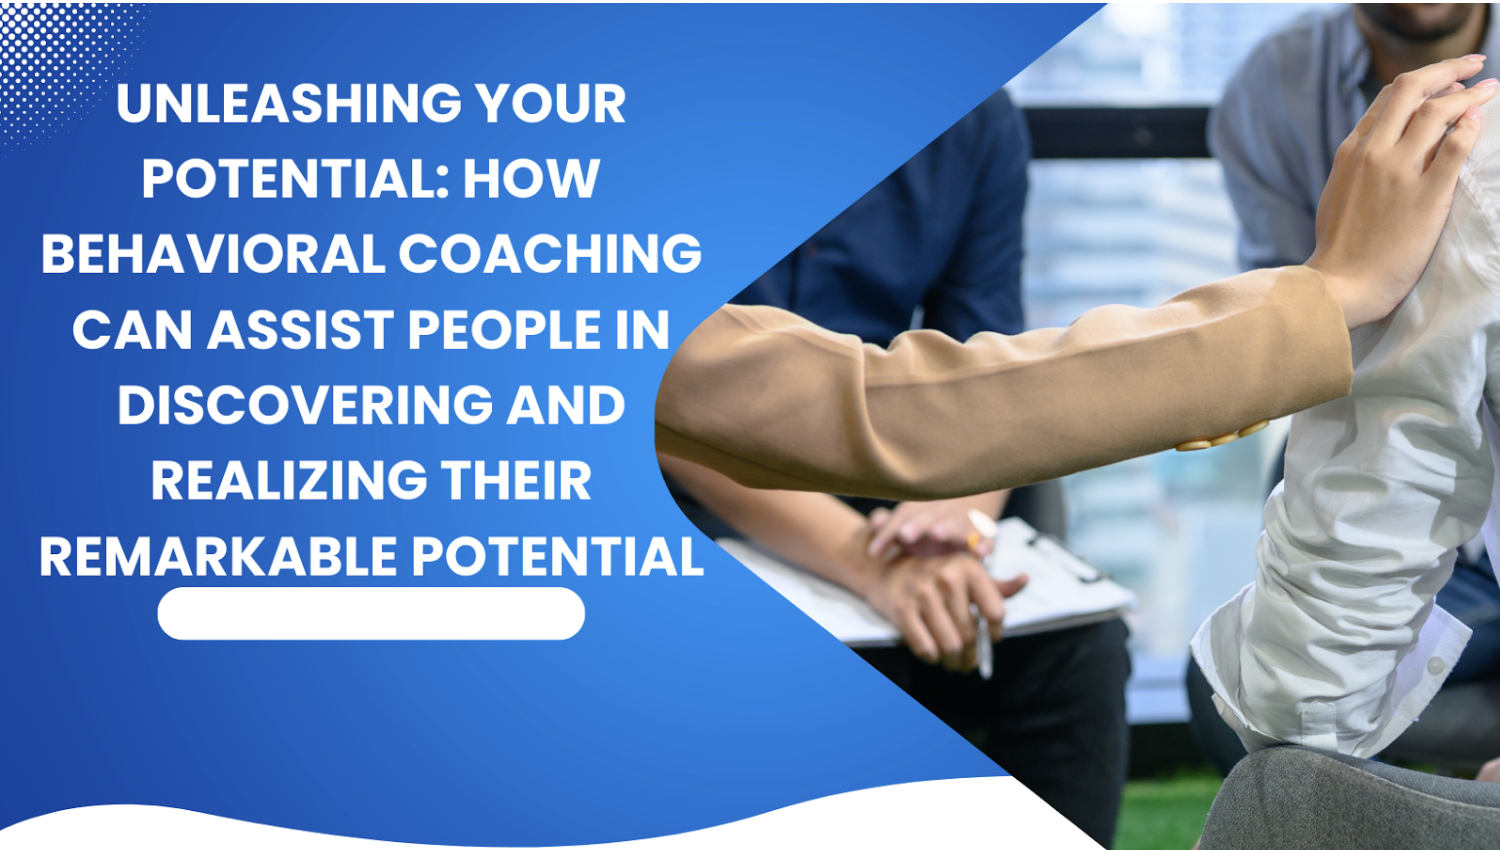 How Behavioural Coaching Can Assist People in Realizing Their Remarkable Potential